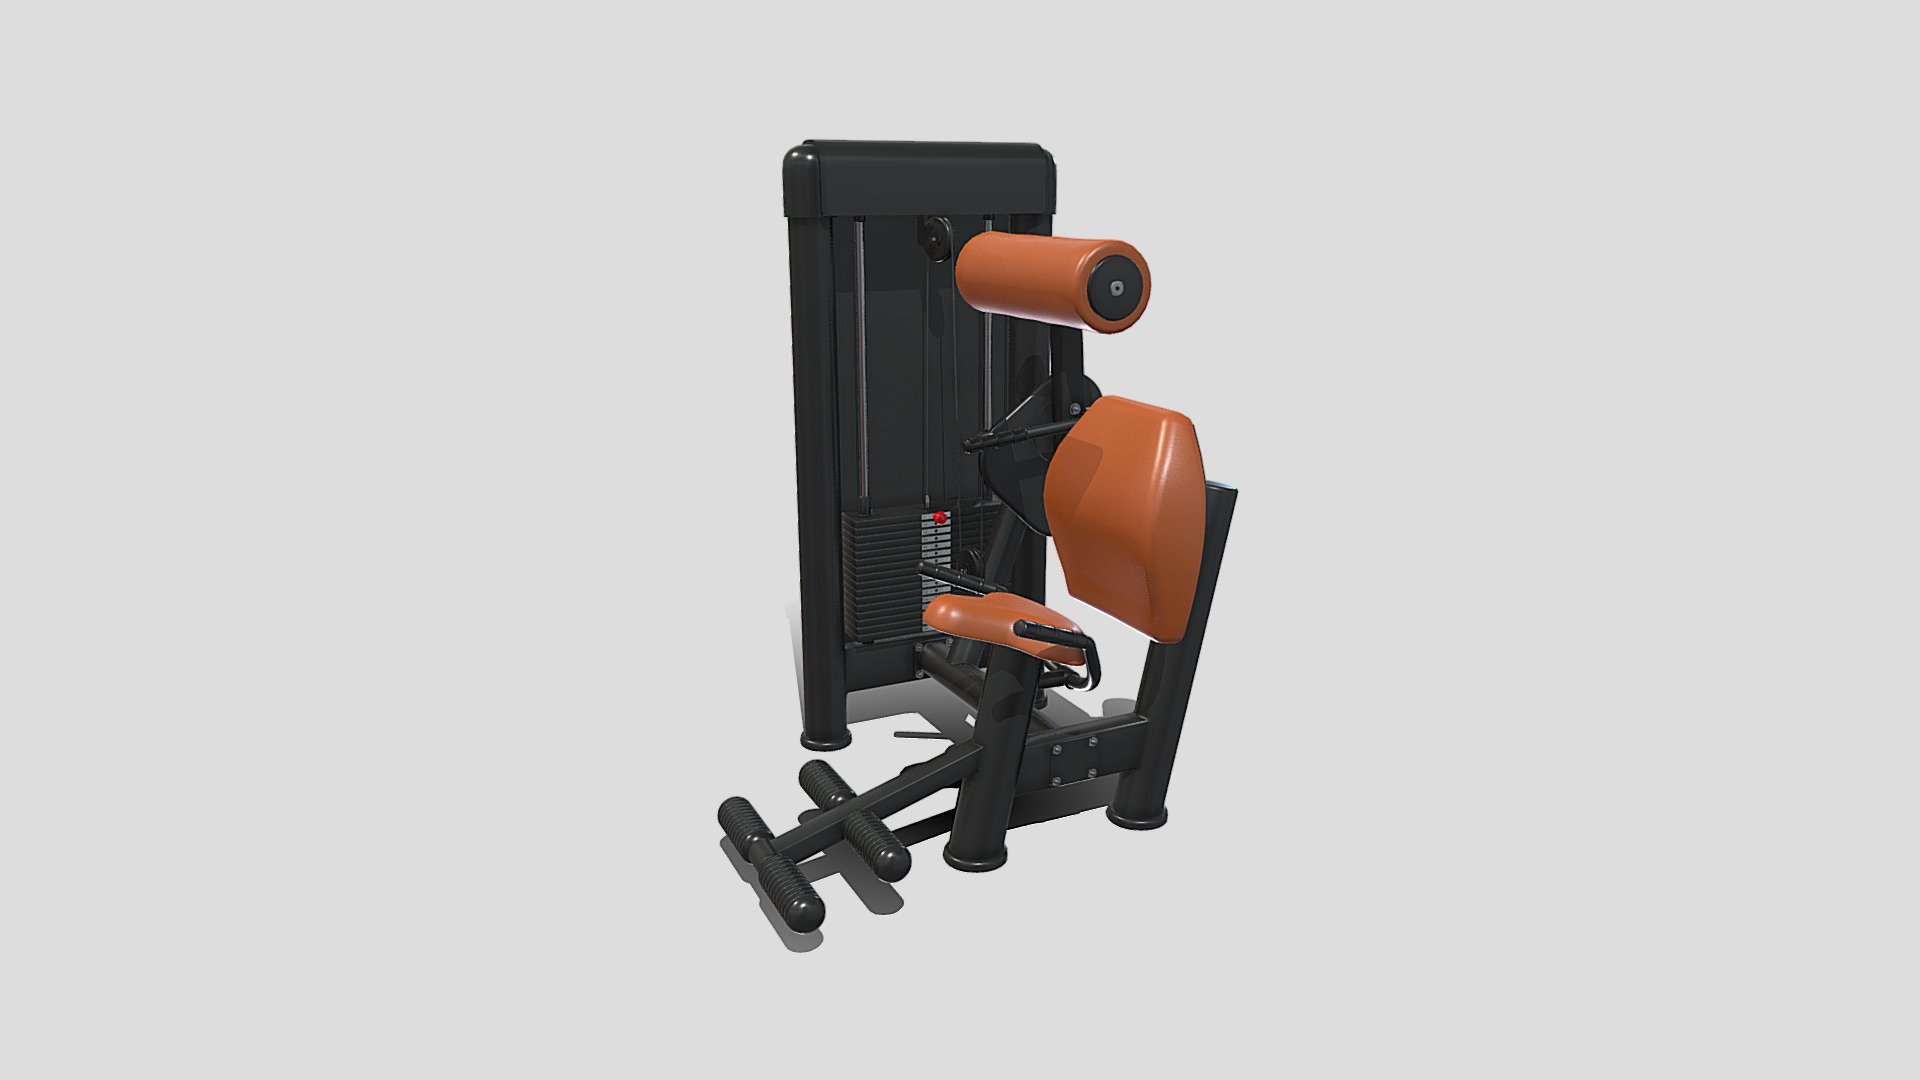 Gym machine 3d model built to real size, rendered with Cycles in Blender, as per seen on attached images. 

File formats:
-.blend, rendered with cycles, as seen in the images;
-.obj, with materials applied;
-.dae, with materials applied;
-.fbx, with materials applied;
-.stl;

Files come named appropriately and split by file format.

3D Software:
The 3D model was originally created in Blender 3.1 and rendered with Cycles.

Materials and textures:
The models have materials applied in all formats, and are ready to import and render.
Materials are image based using PBR, the model comes with five 4k png image textures.

Preview scenes:
The preview images are rendered in Blender using its built-in render engine &lsquo;Cycles'.
Note that the blend files come directly with the rendering scene included and the render command will generate the exact result as seen in previews.

General:
The models are built mostly out of quads.

For any problems please feel free to contact me.

Don't forget to rate and enjoy! - Lower back machine - Buy Royalty Free 3D model by dragosburian 3d model